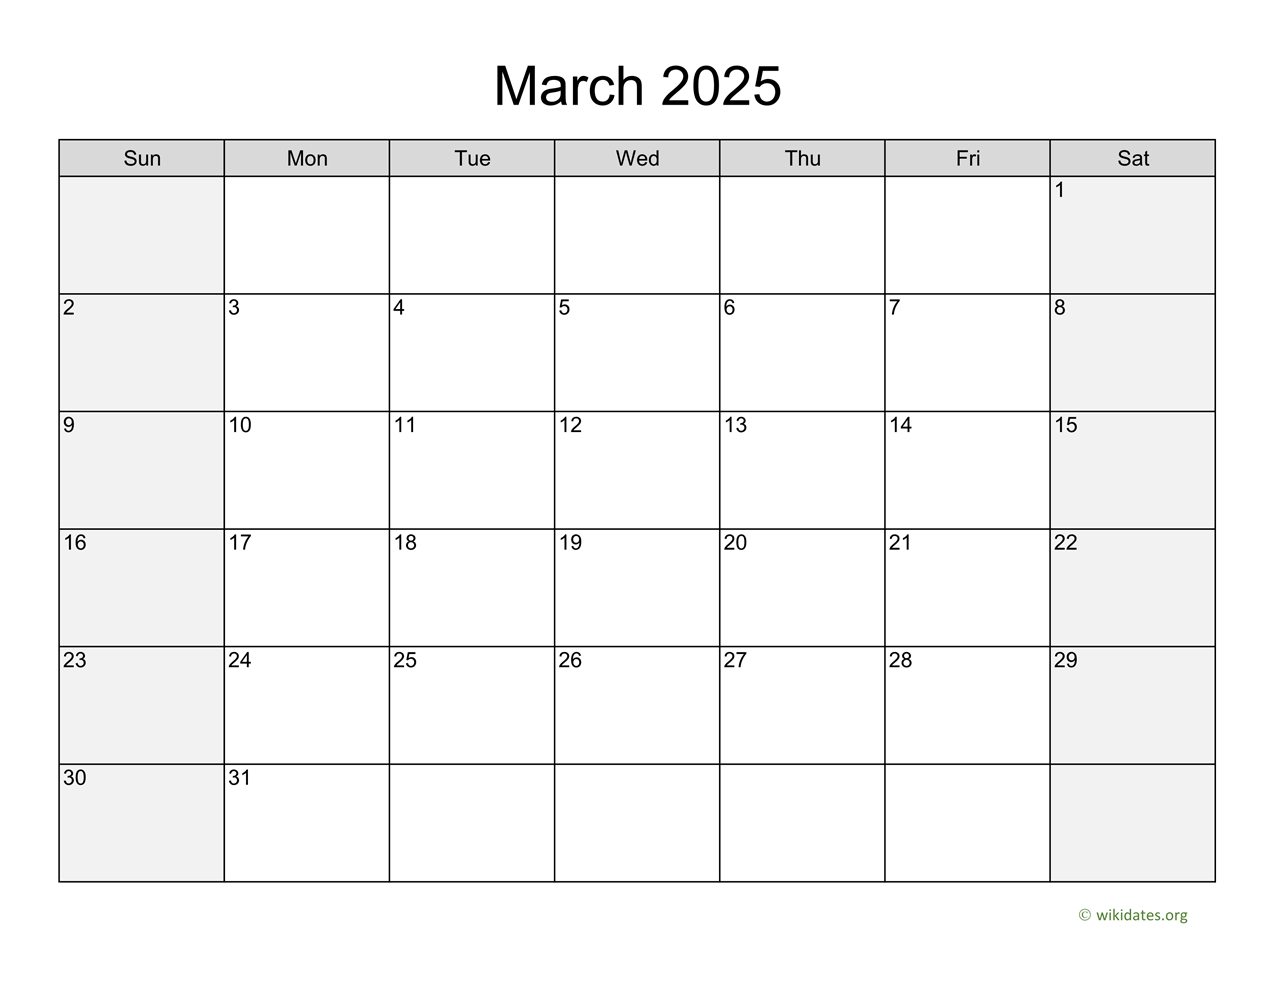 march-2025-calendar-with-weekend-shaded-wikidates